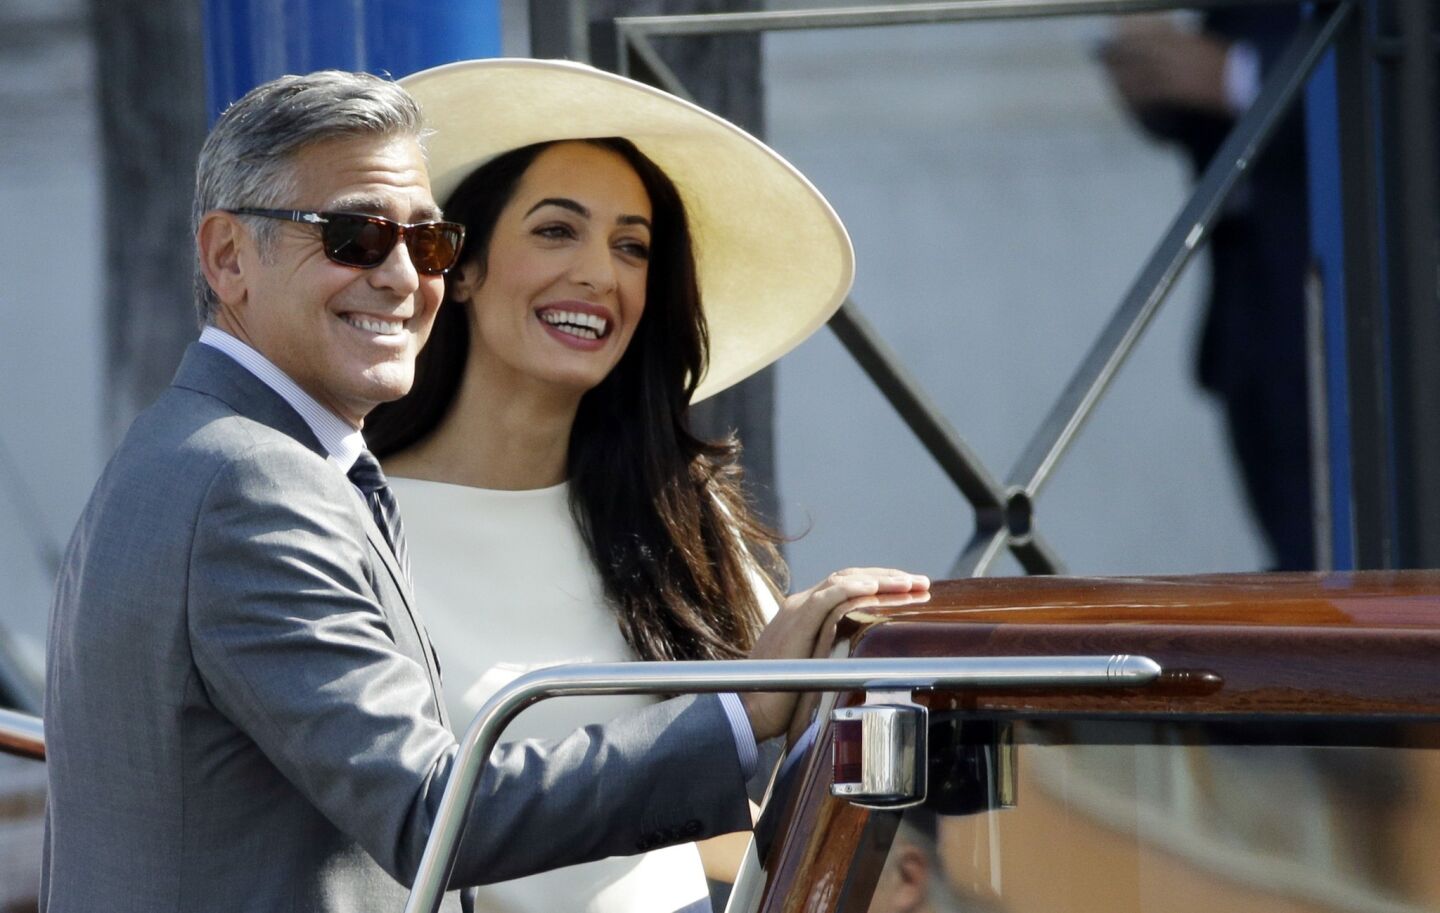 George Clooney and Amal Alamuddin leave Venice's city hall after a civil service to make their Saturday-night marriage legal.